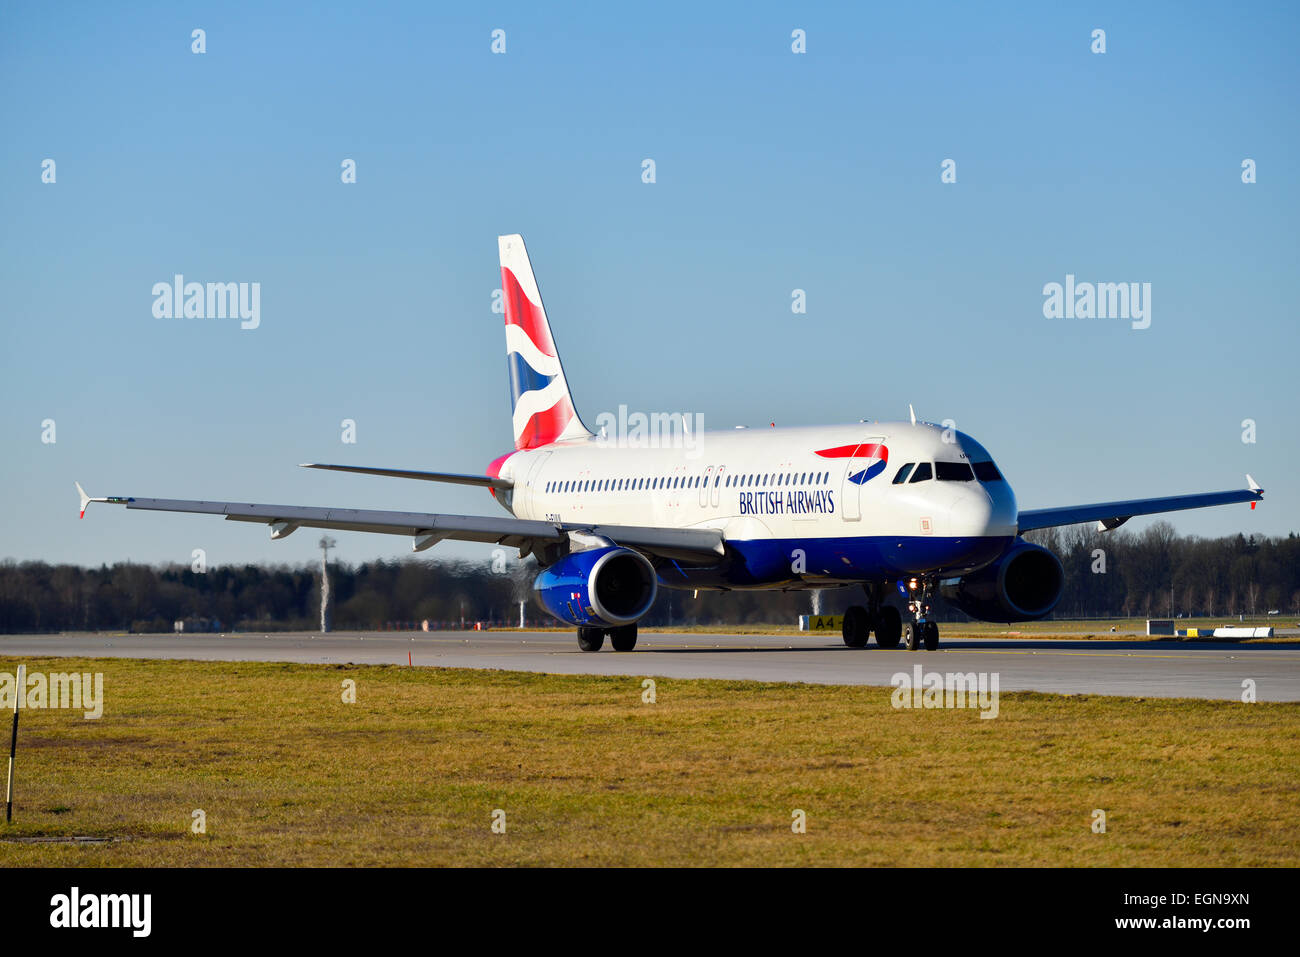 british airways, taxiway, roll out, Stock Photo